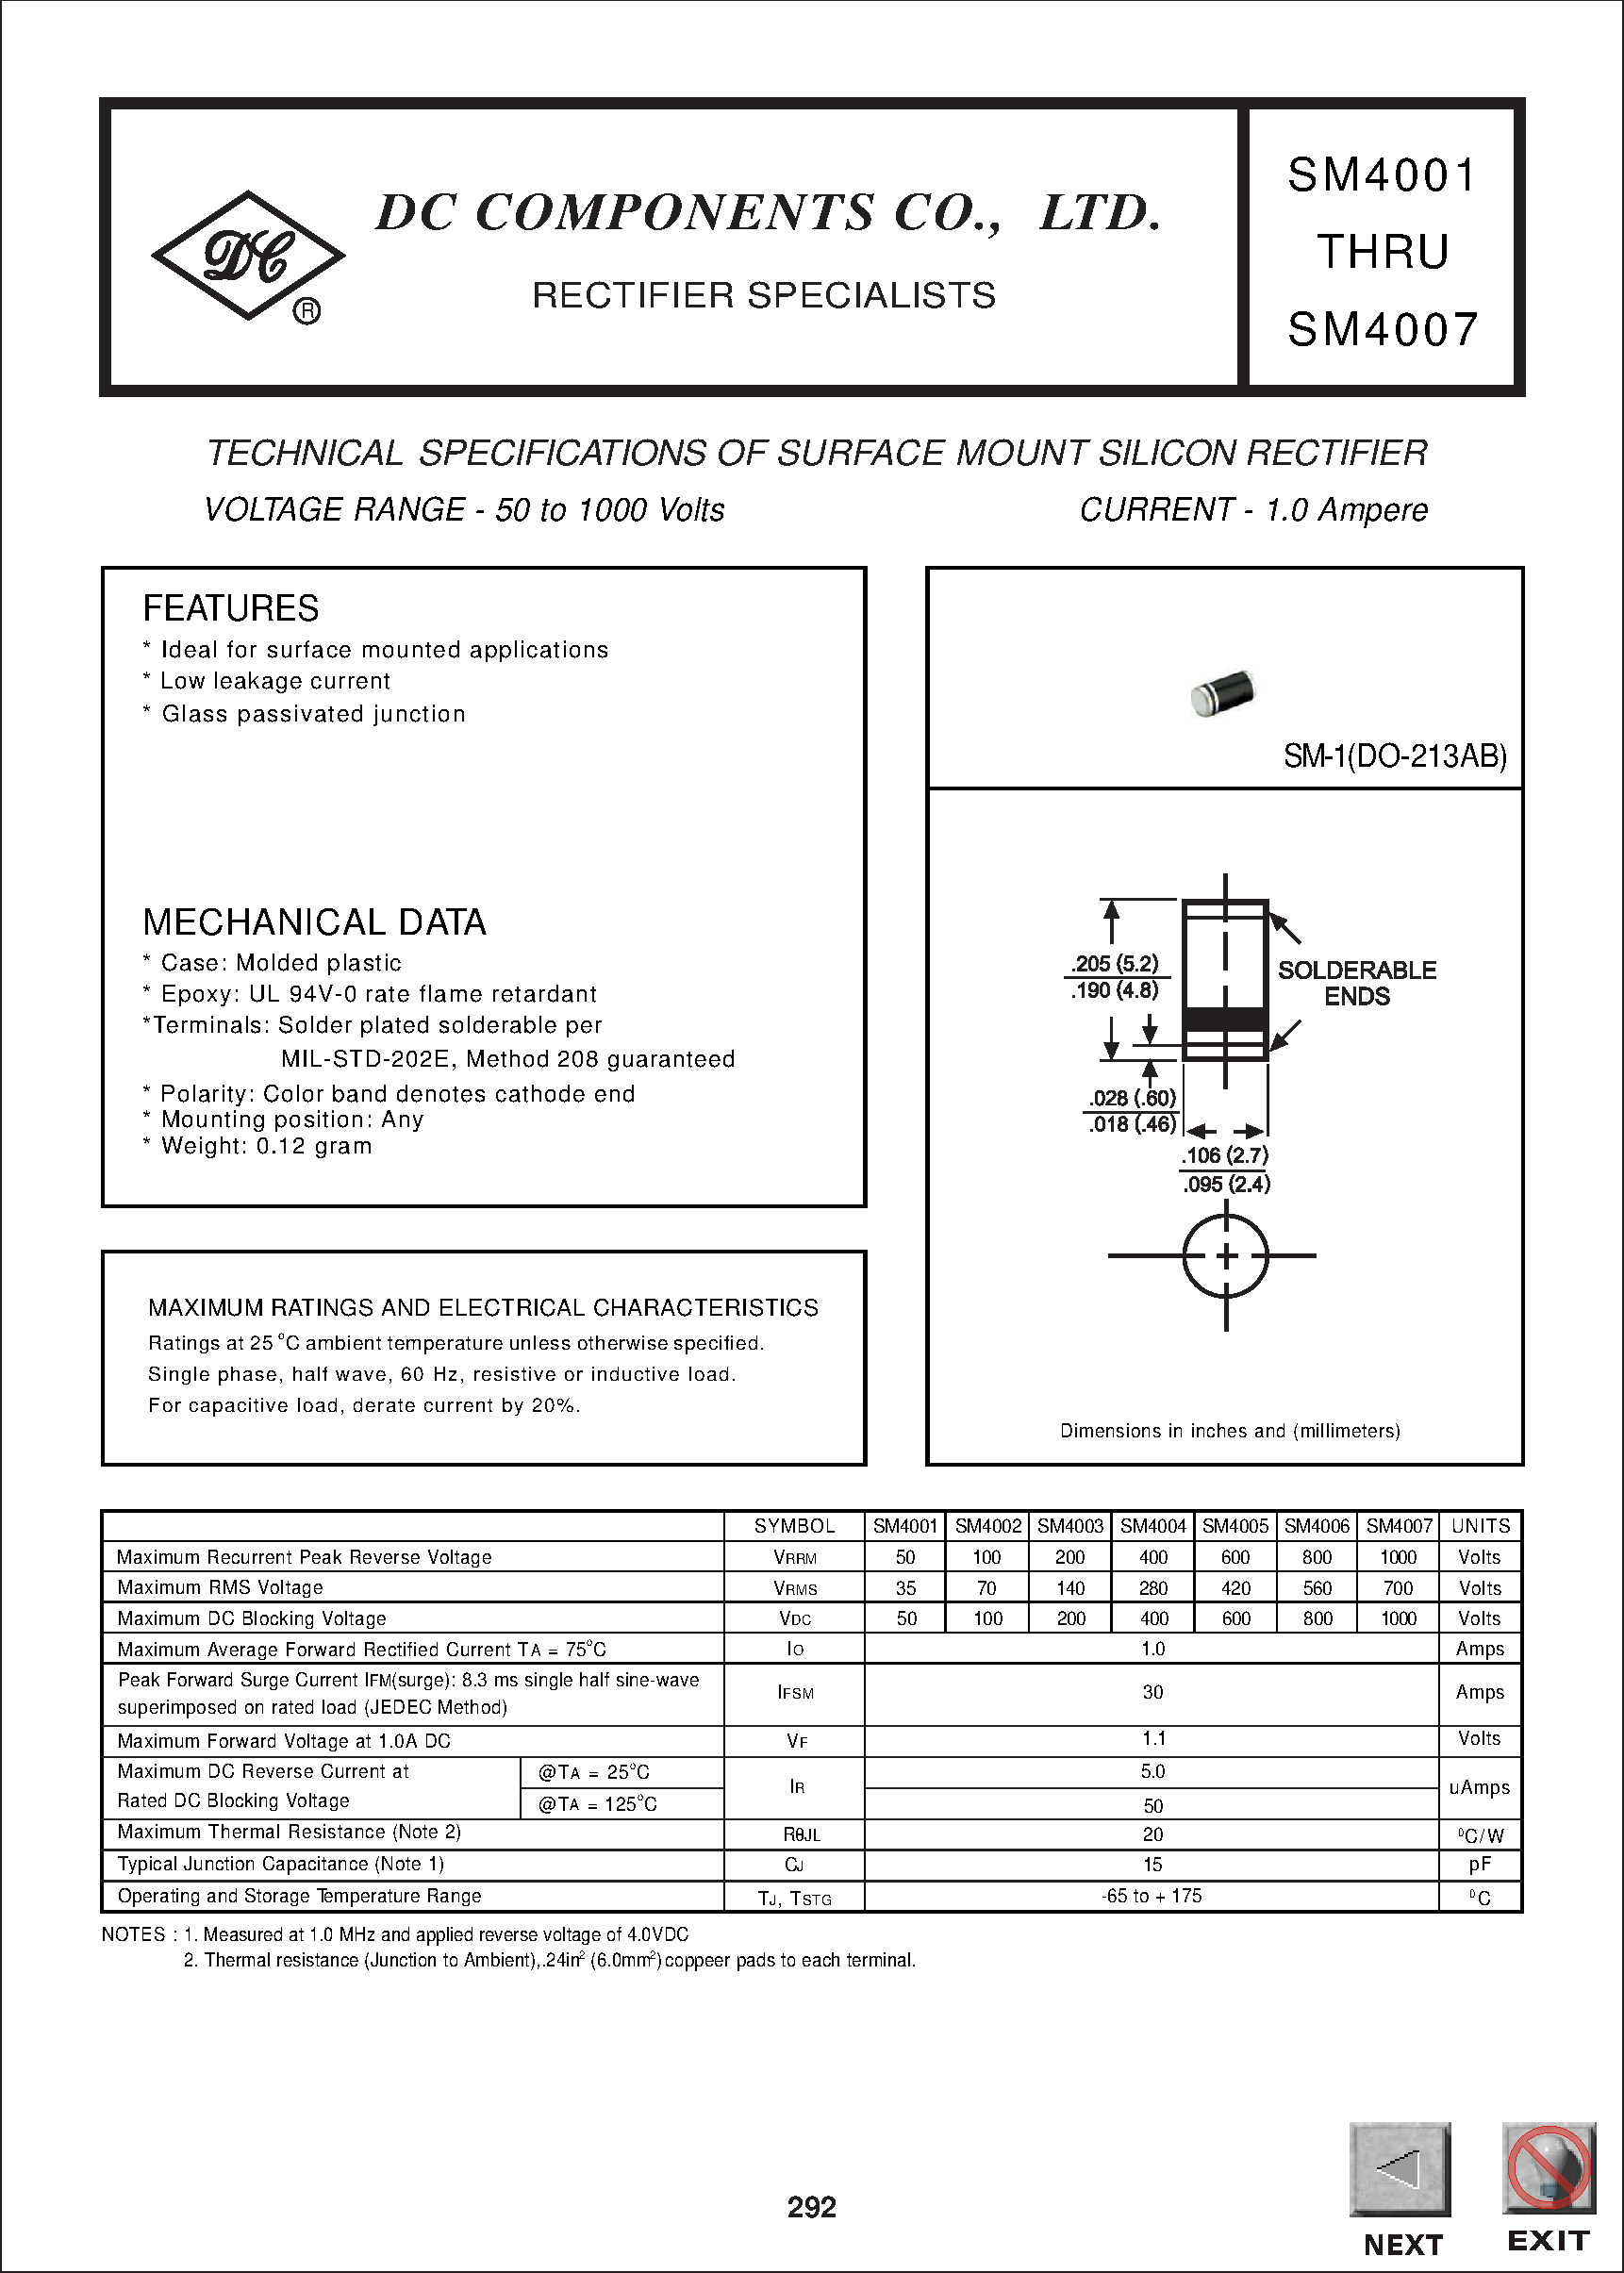 Даташит SM4003 - TECHNICAL SPECIFICATIONS OF SURFACE MOUNT SILICON RECTIFIER страница 1